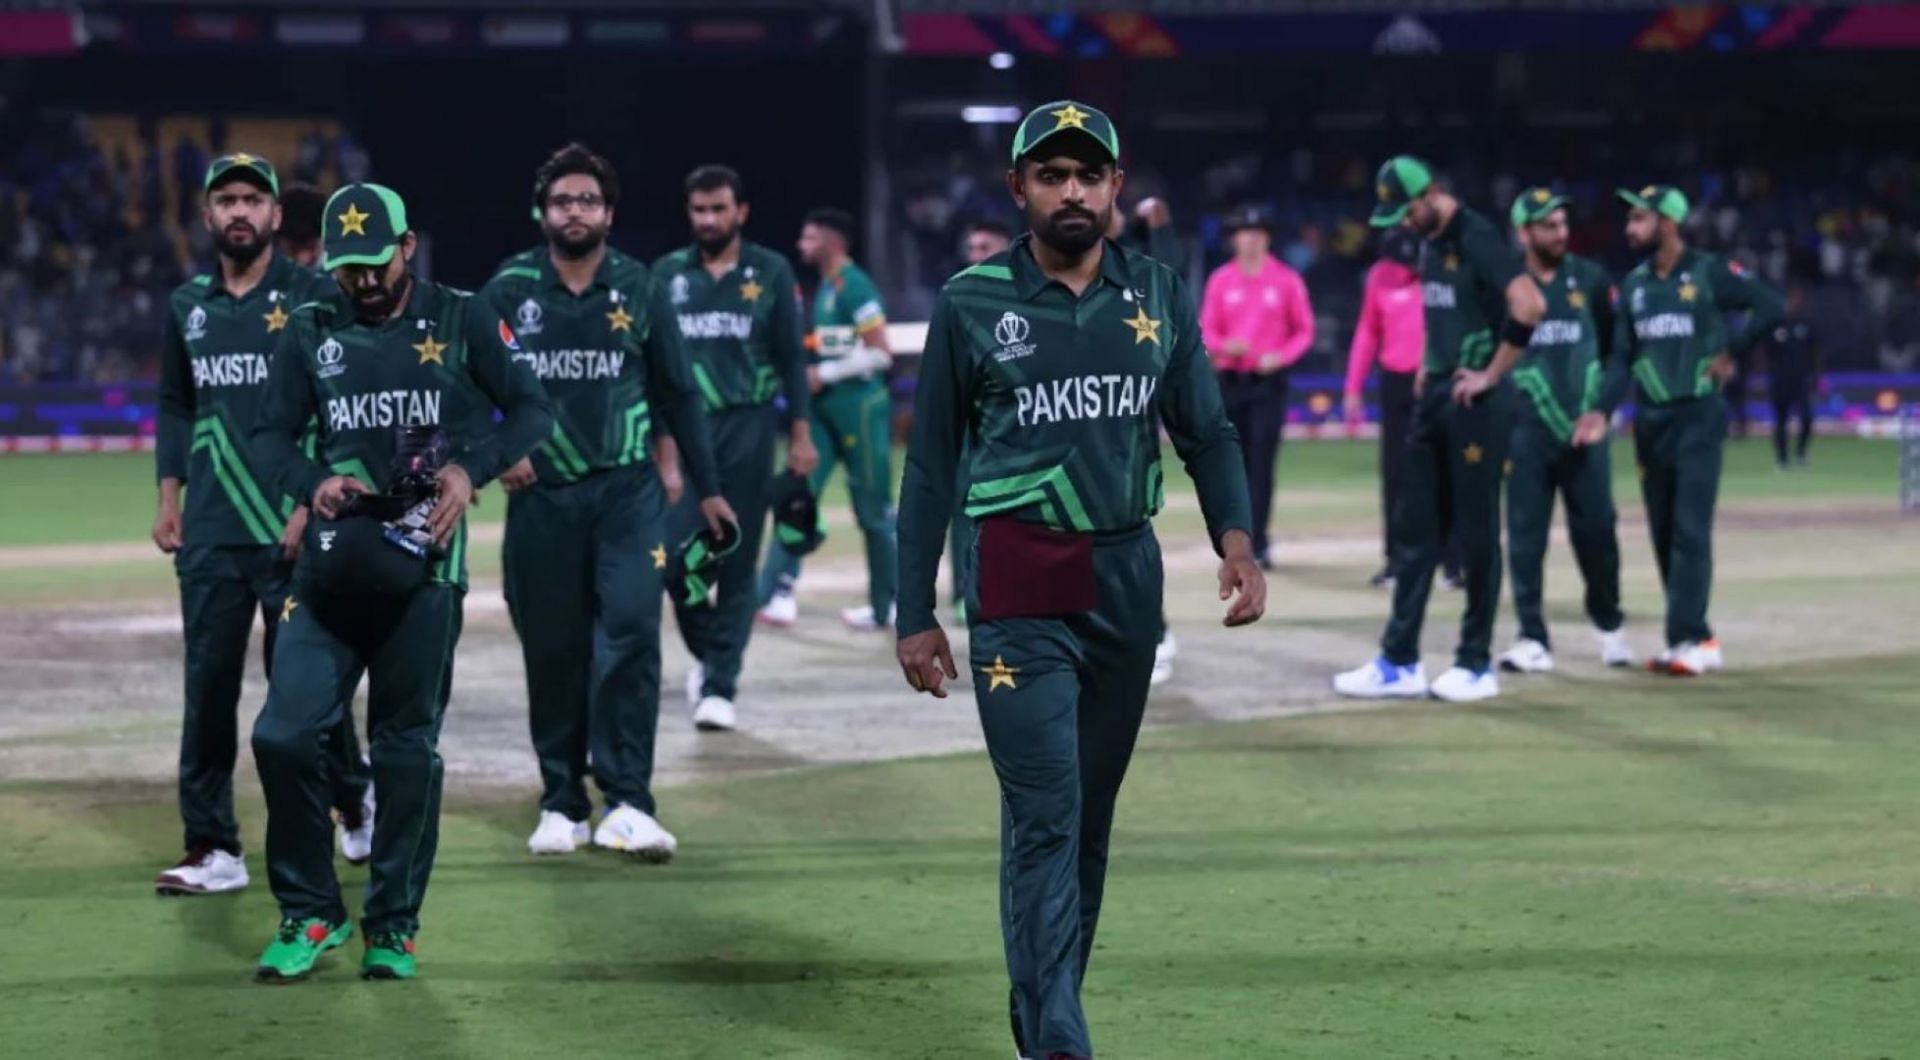 Pakistan suffered a heartbreaking defeat to South Africa in Chennai